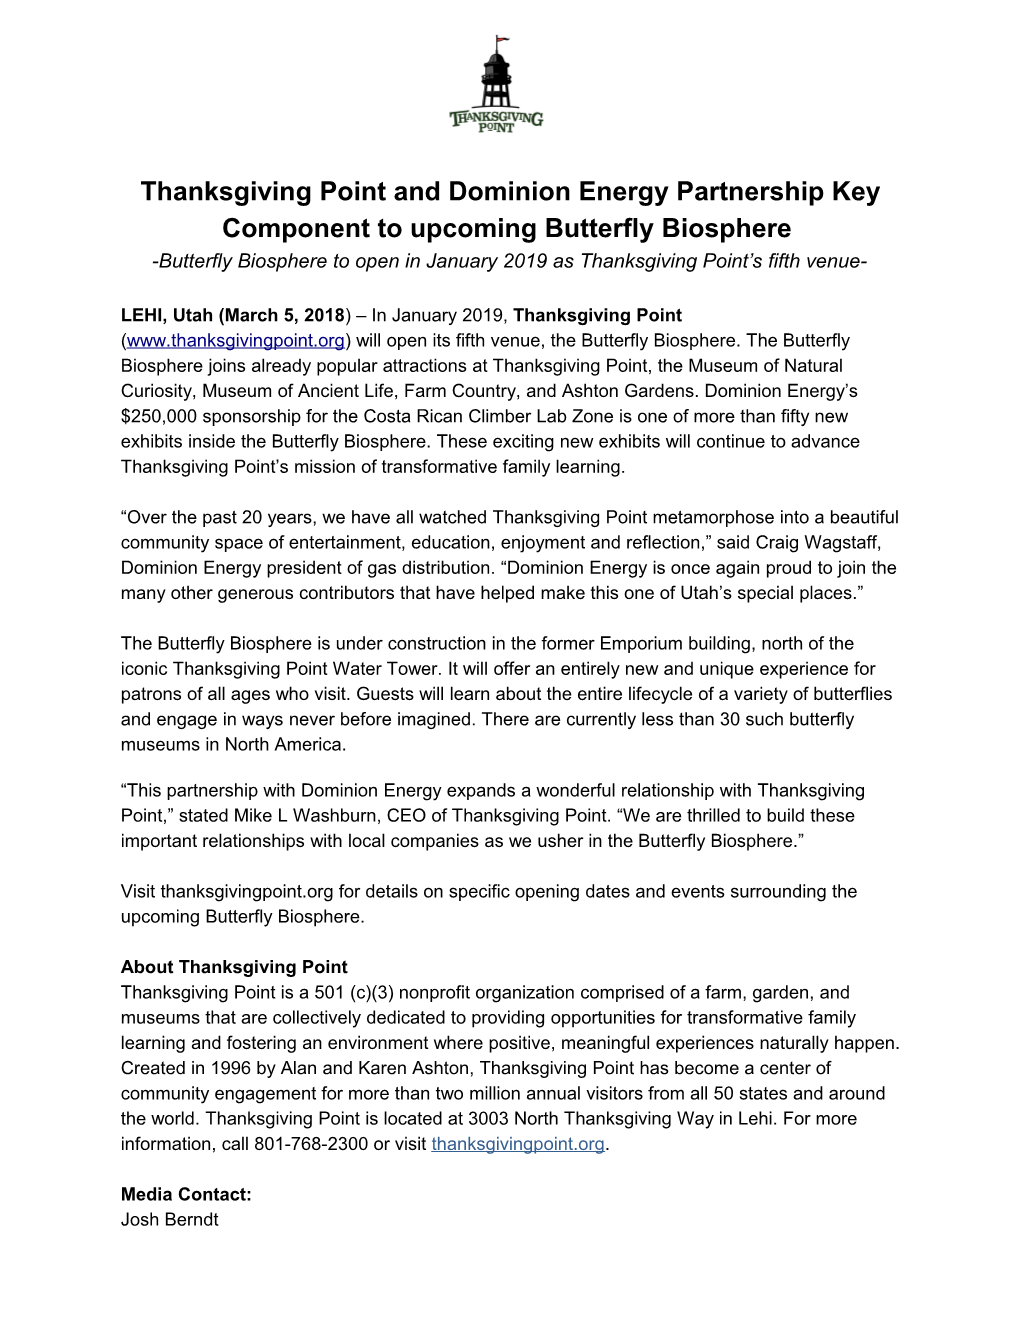 Thanksgiving Point and Dominion Energy Partnership Key Component to Upcoming Butterfly